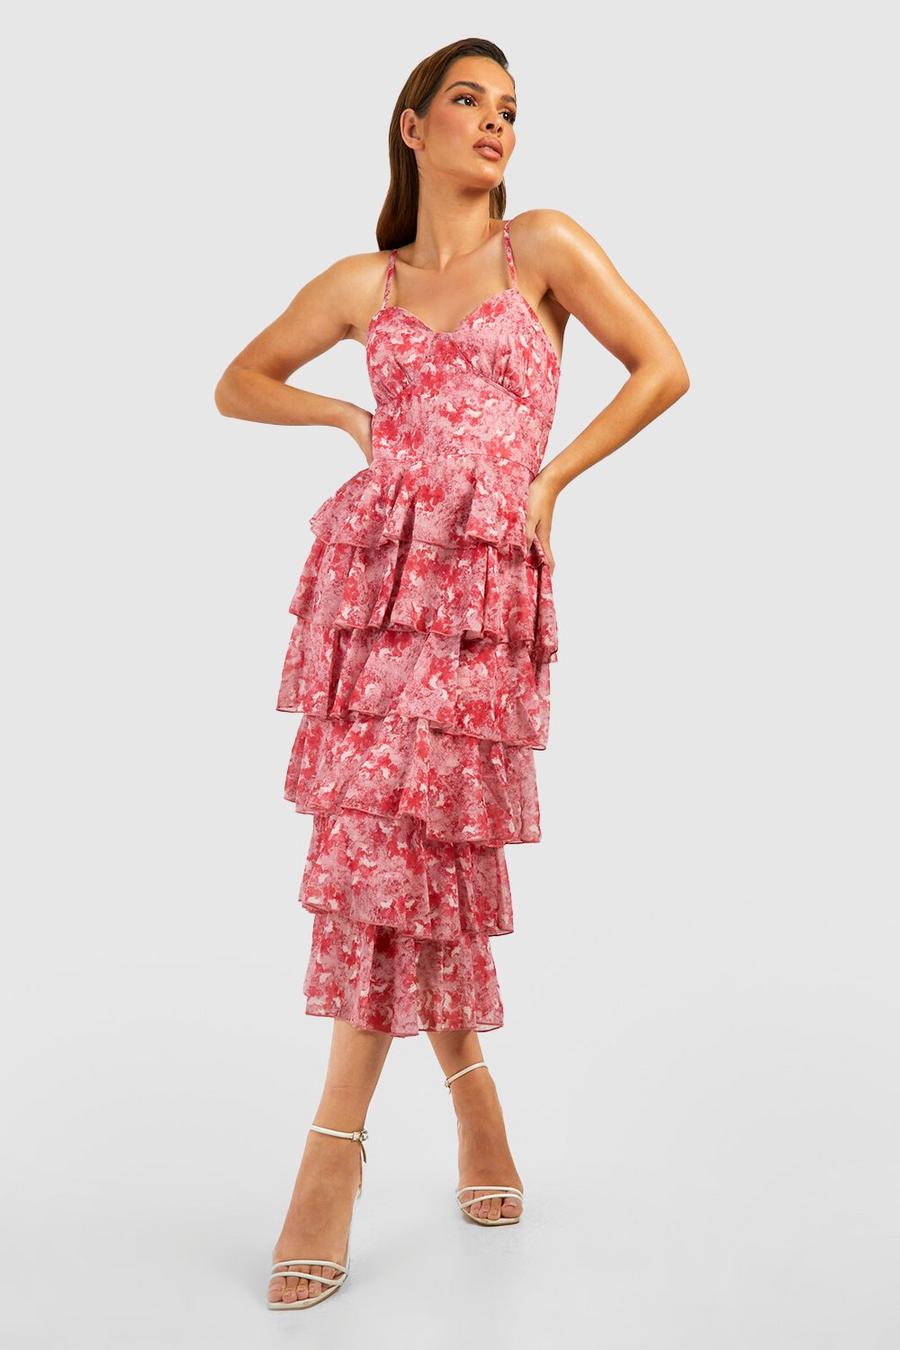 Lucky Brand Pink Coral Floral Embroidered Tiered Sleeveless Midi